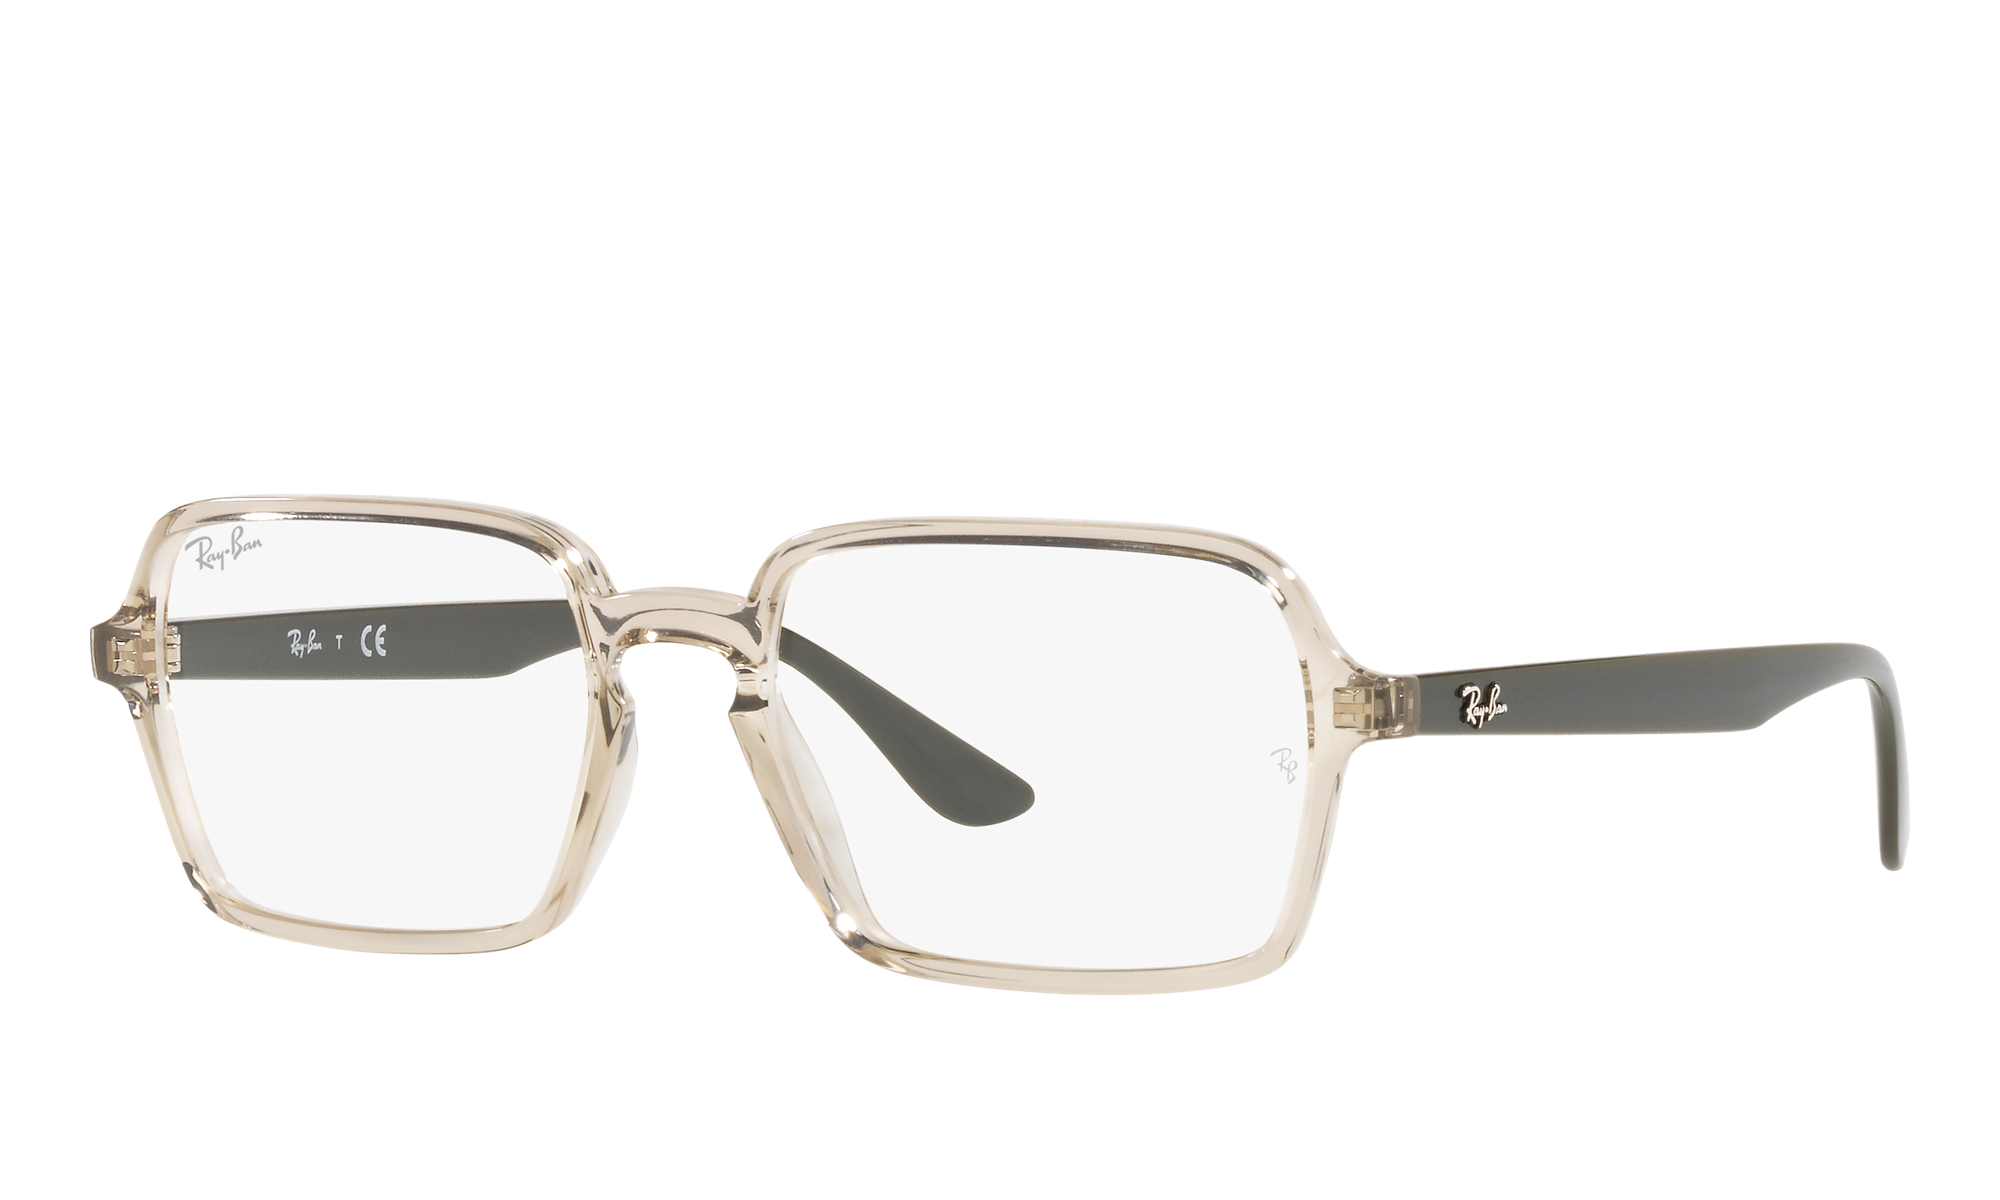 Ray-Ban Unisex Rx7198 Transparent Beige Size: Extra Small